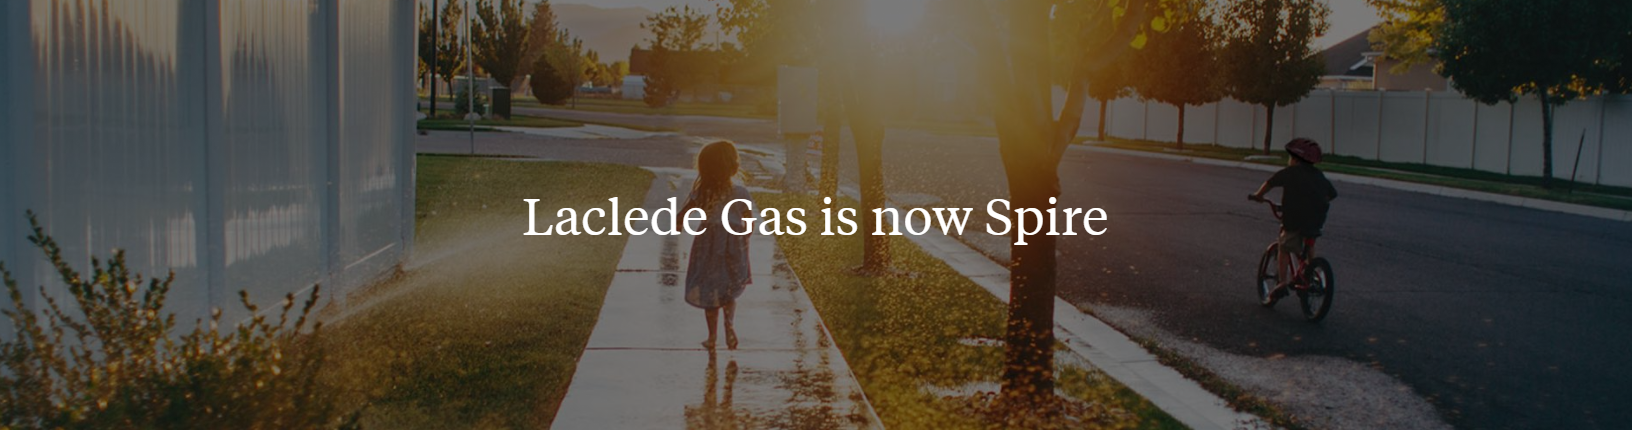 Image of girl and father walking with text overlay stating Laclede Gas is now Spire